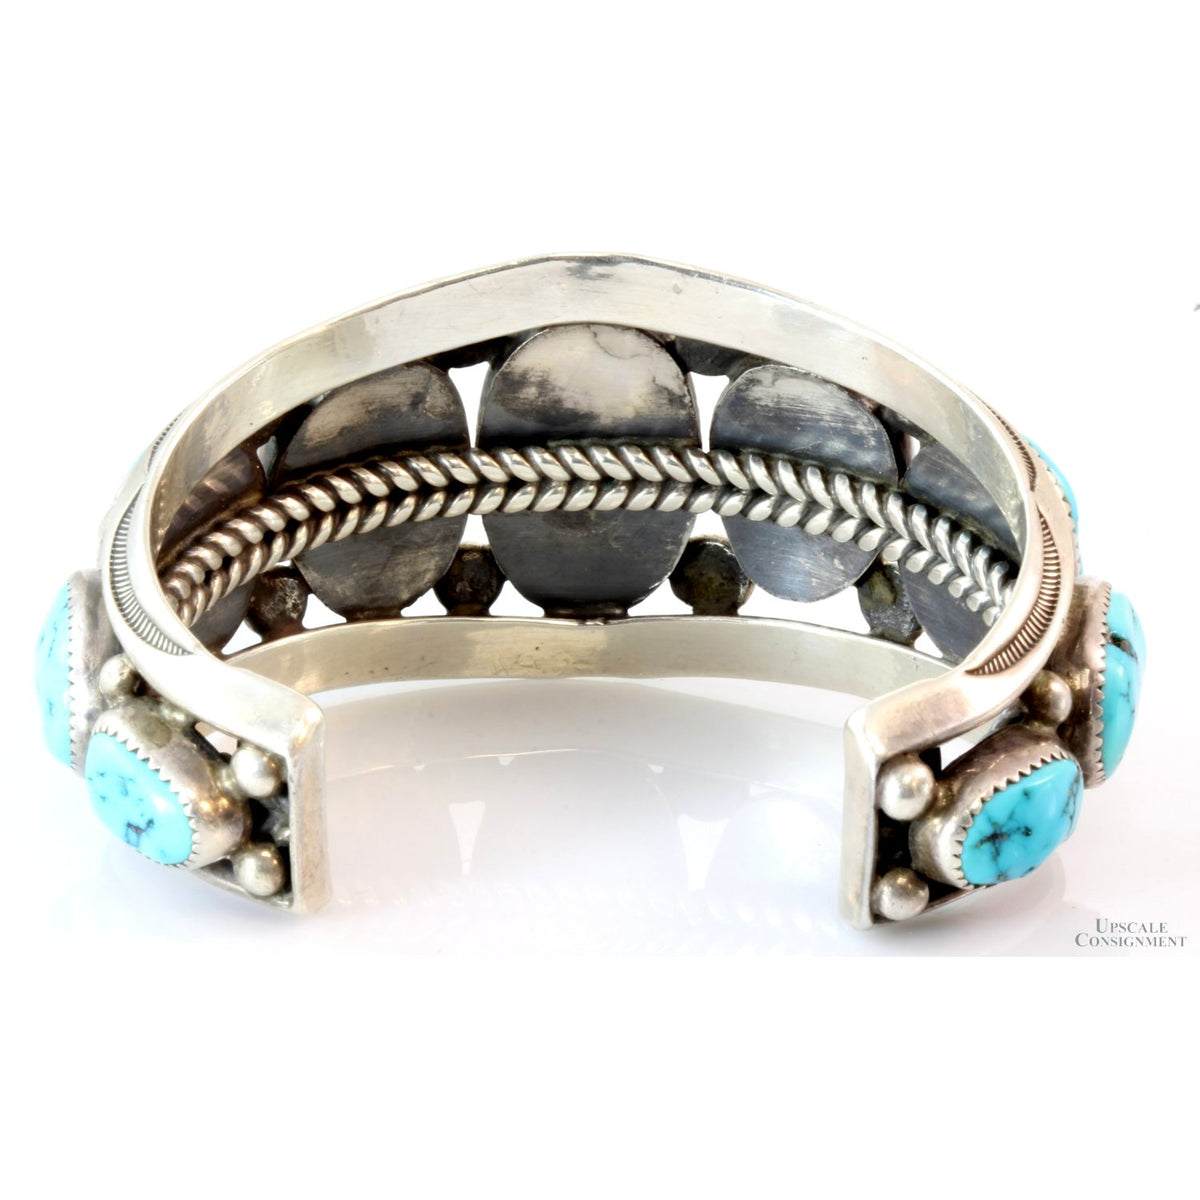 Vintage 9-Stone Turquoise Sterling Silver Cuff by Navajo Silversmith Orville Tsinnie